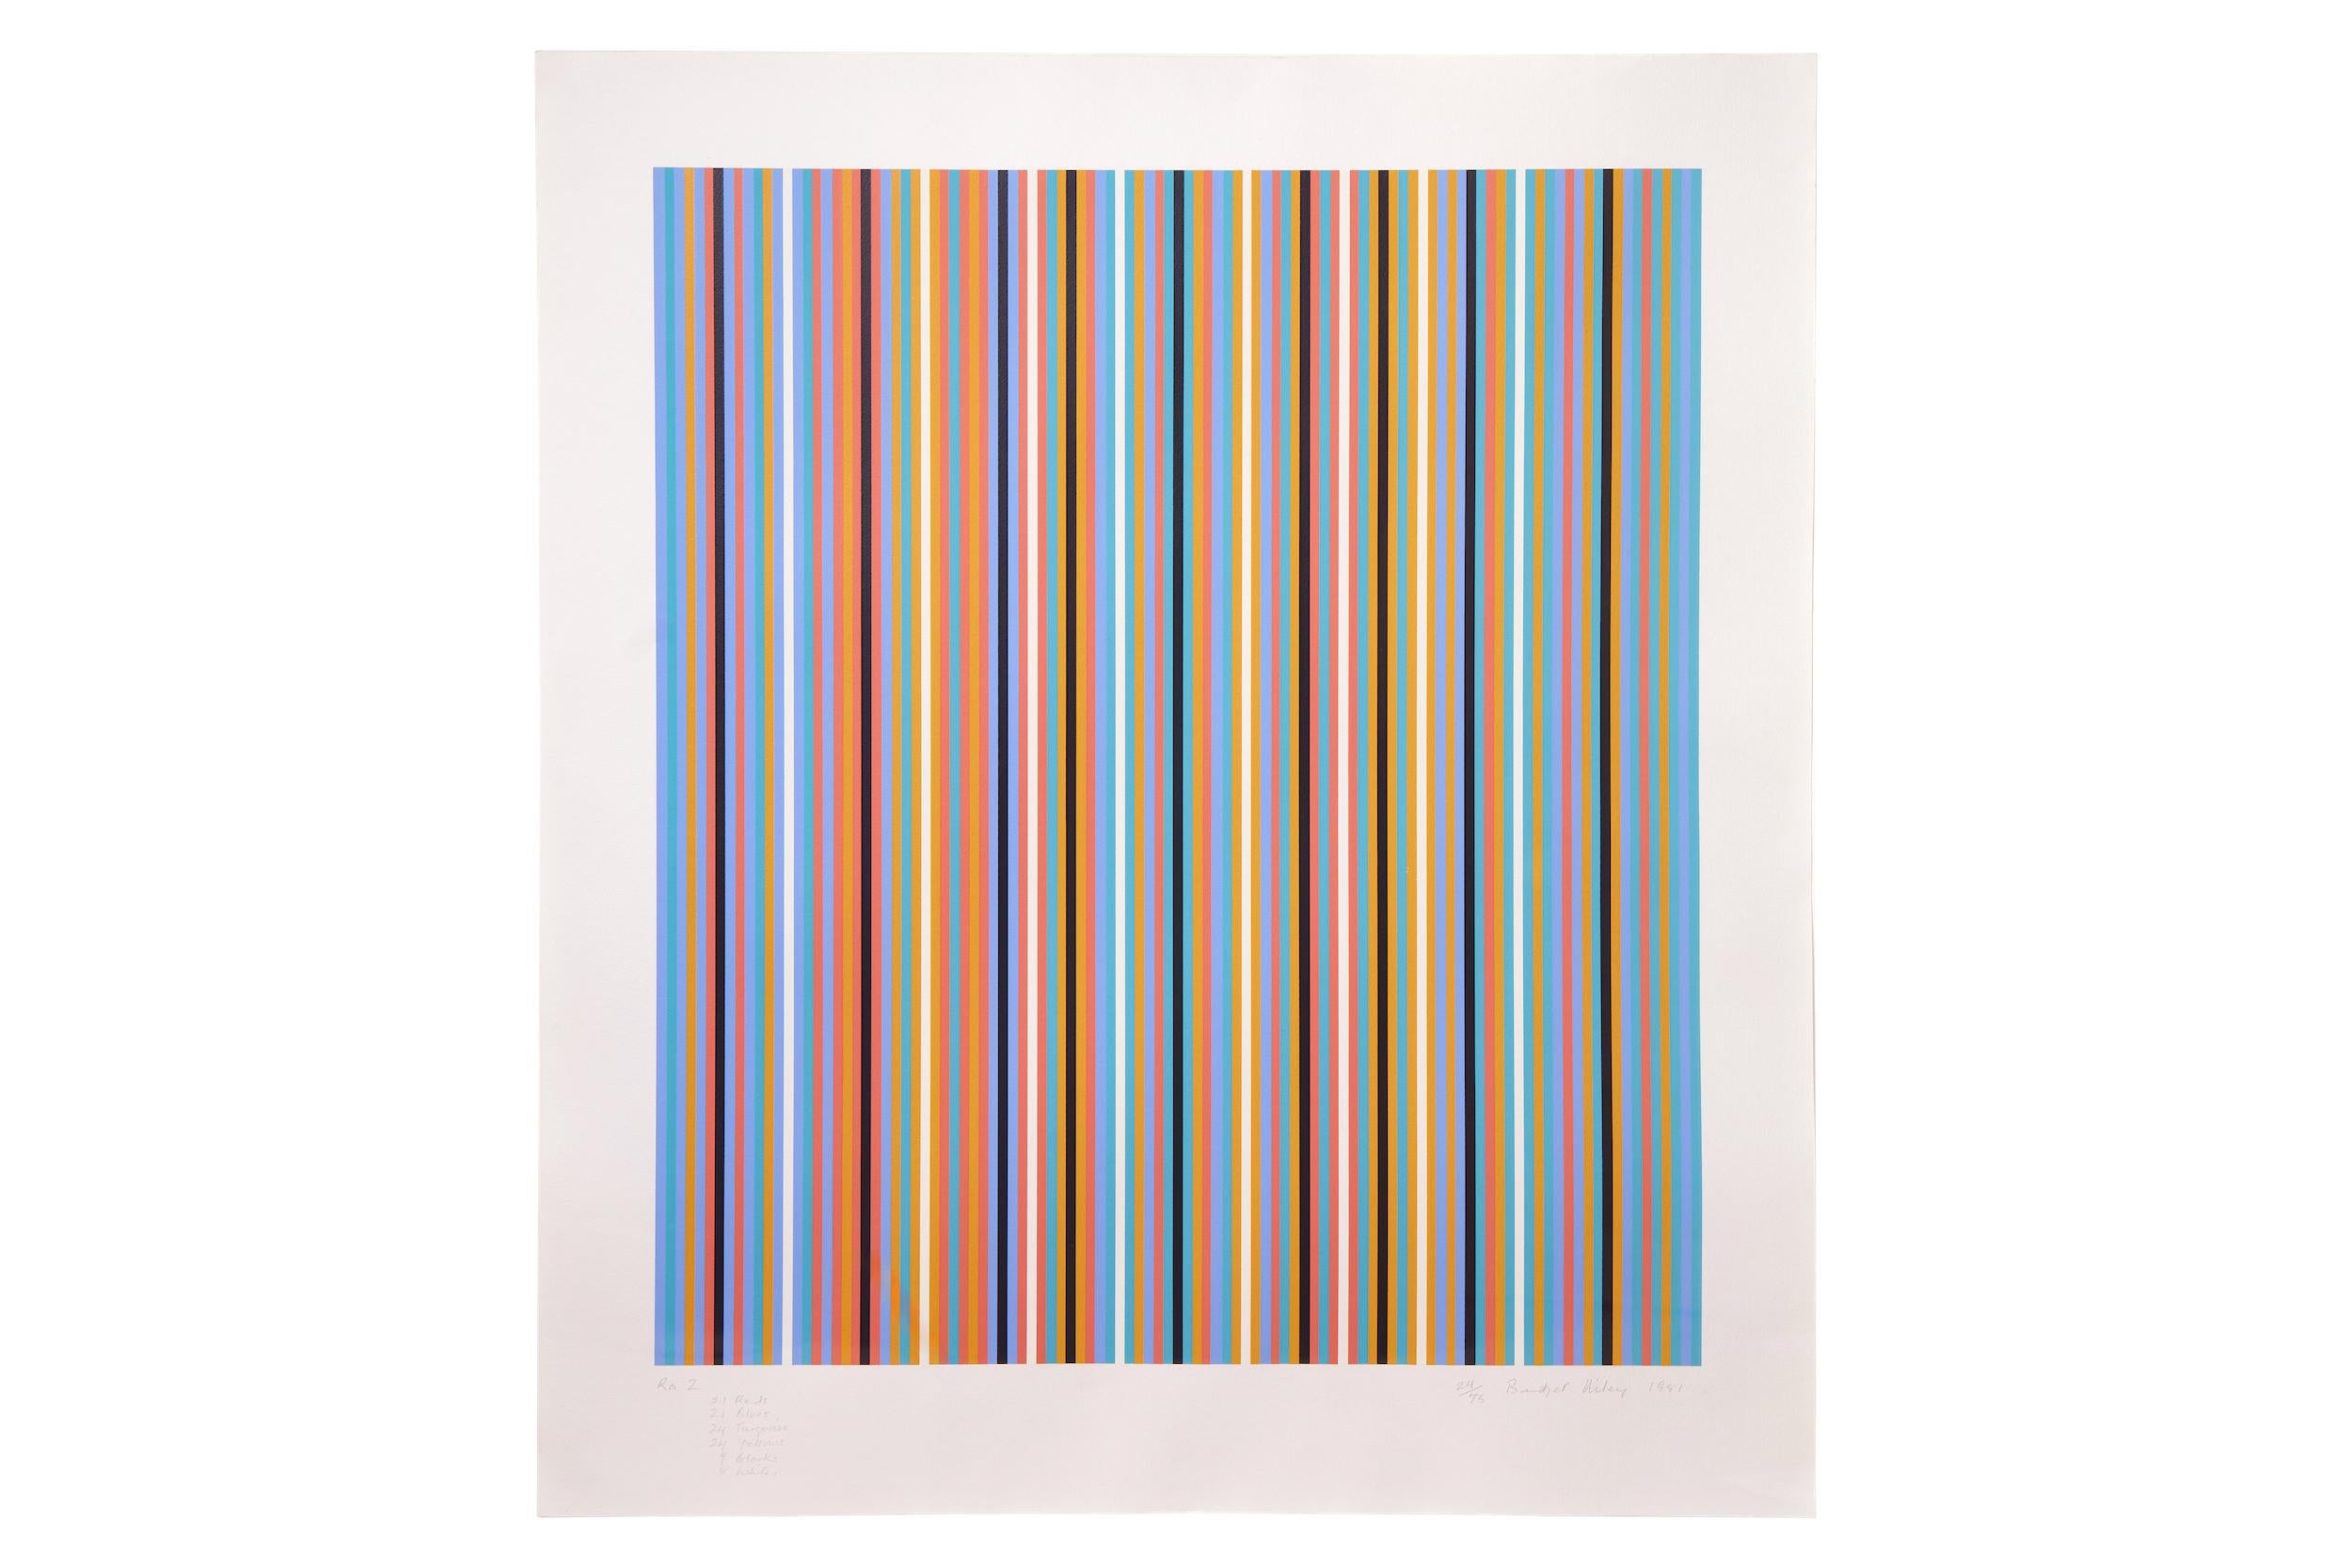 RA 2 -- Print, Coloured Lines, Abstract, Op Art by Bridget RIley